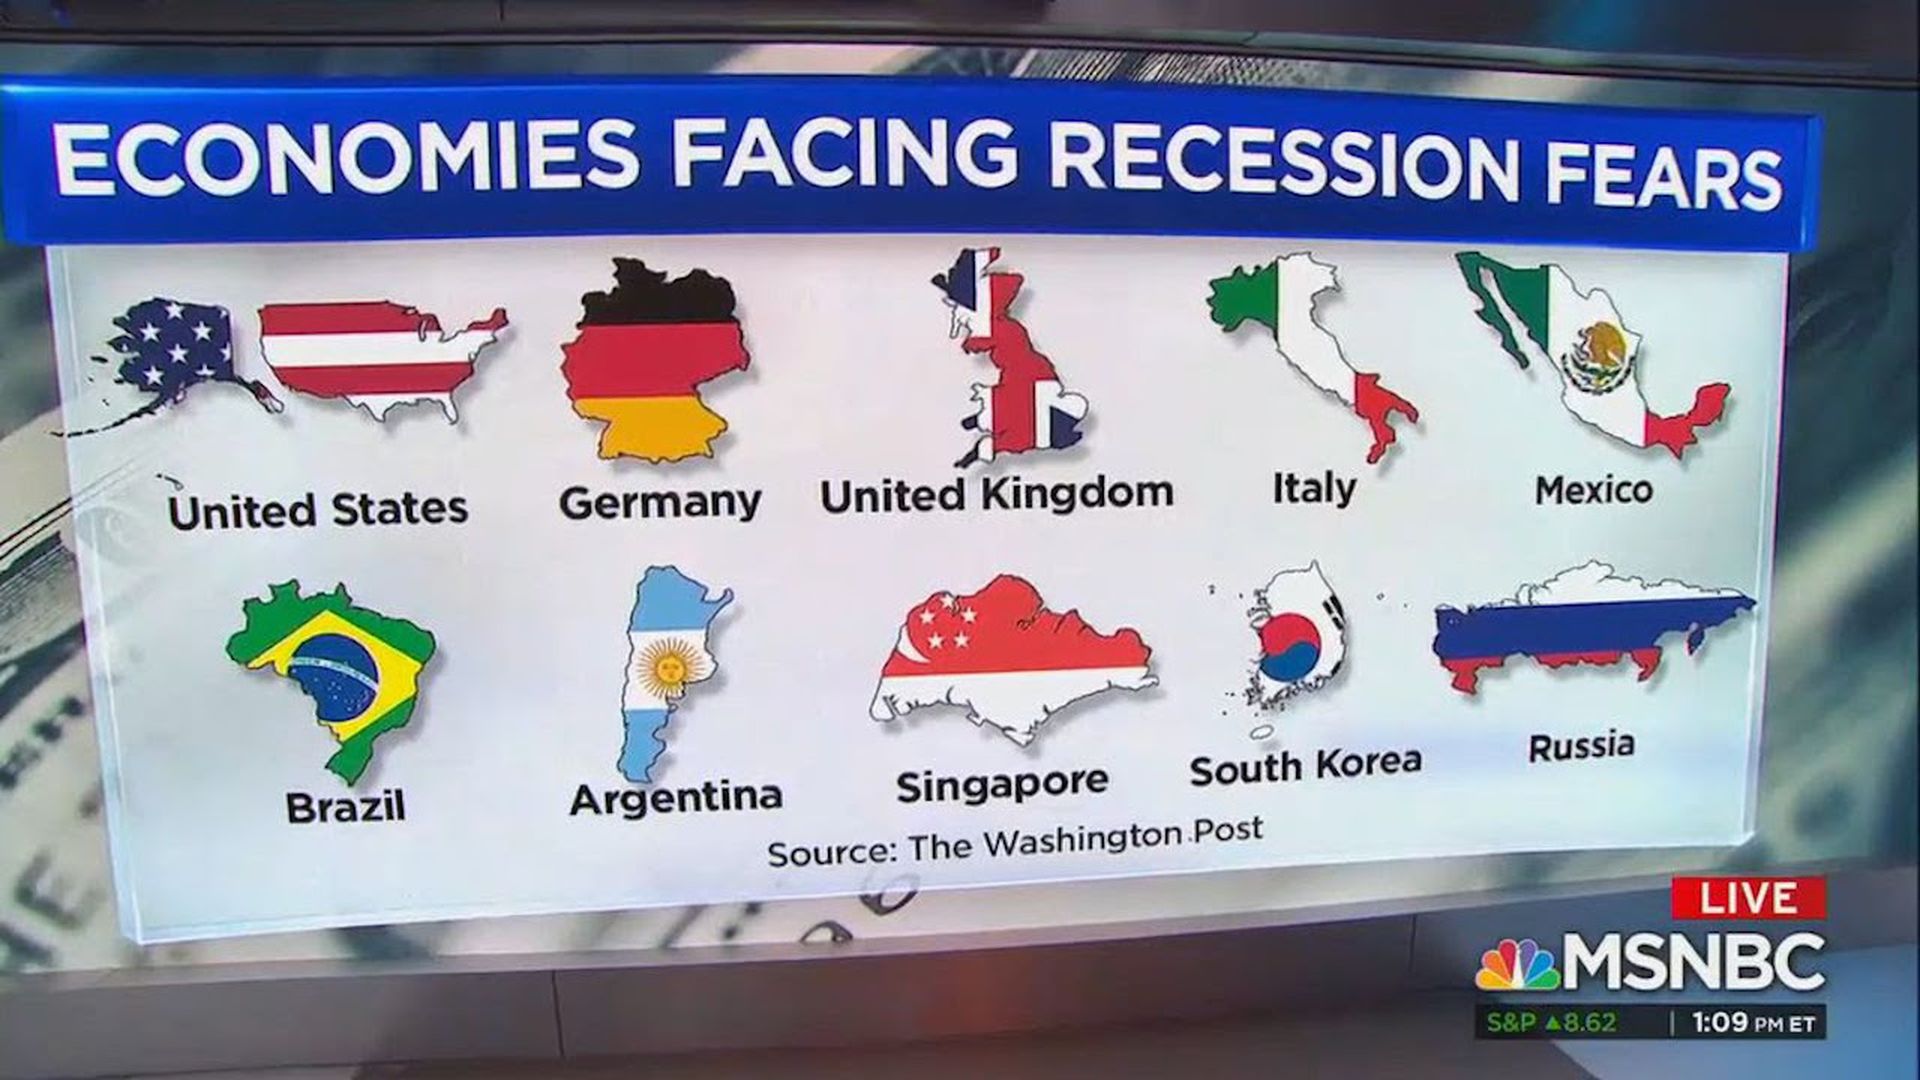 A list of economies facing recession fears